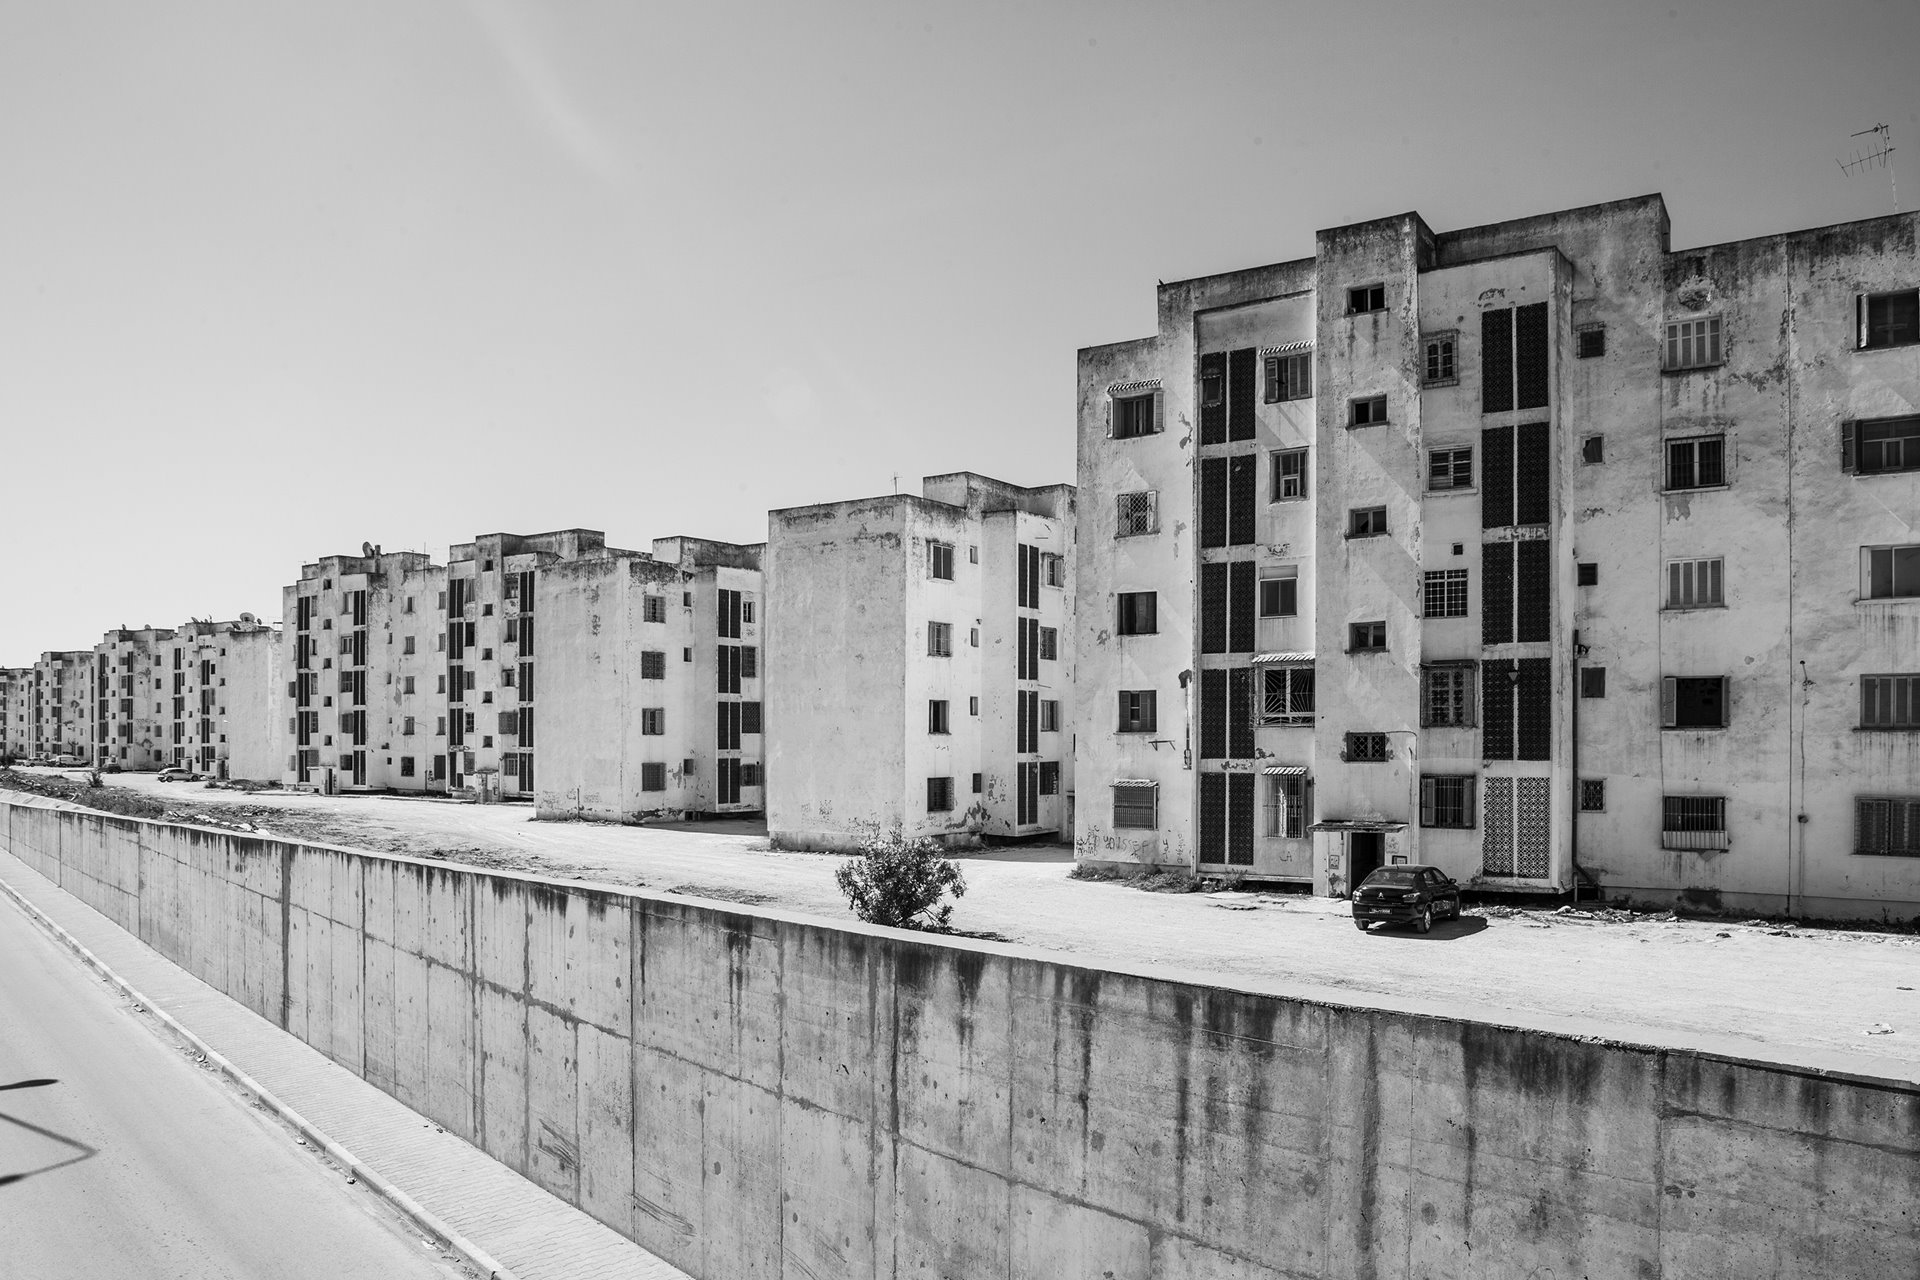 The Ennozha housing complex in Ariana, Tunis, Tunisia, built by the government to meet housing needs in the capital, was intended mainly for the middle class. The government sold the apartments mainly to people who worked in the public sector.